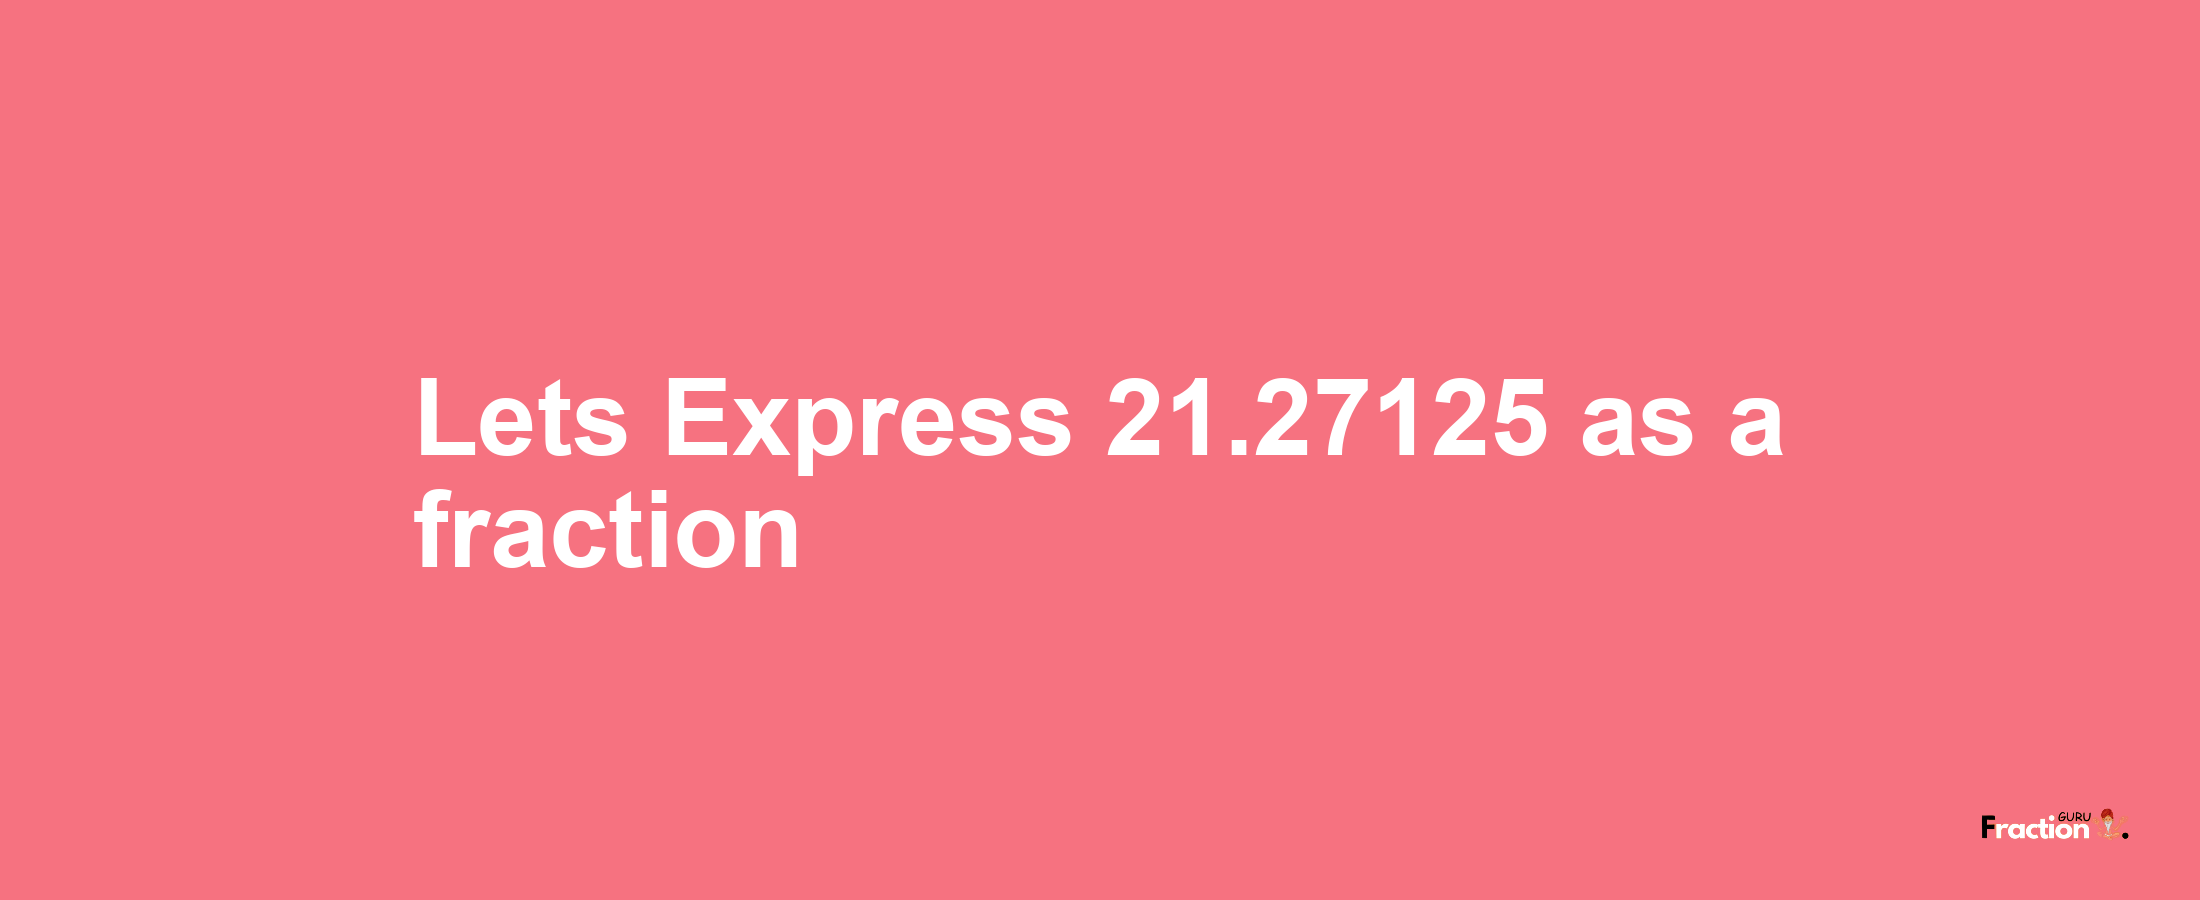 Lets Express 21.27125 as afraction